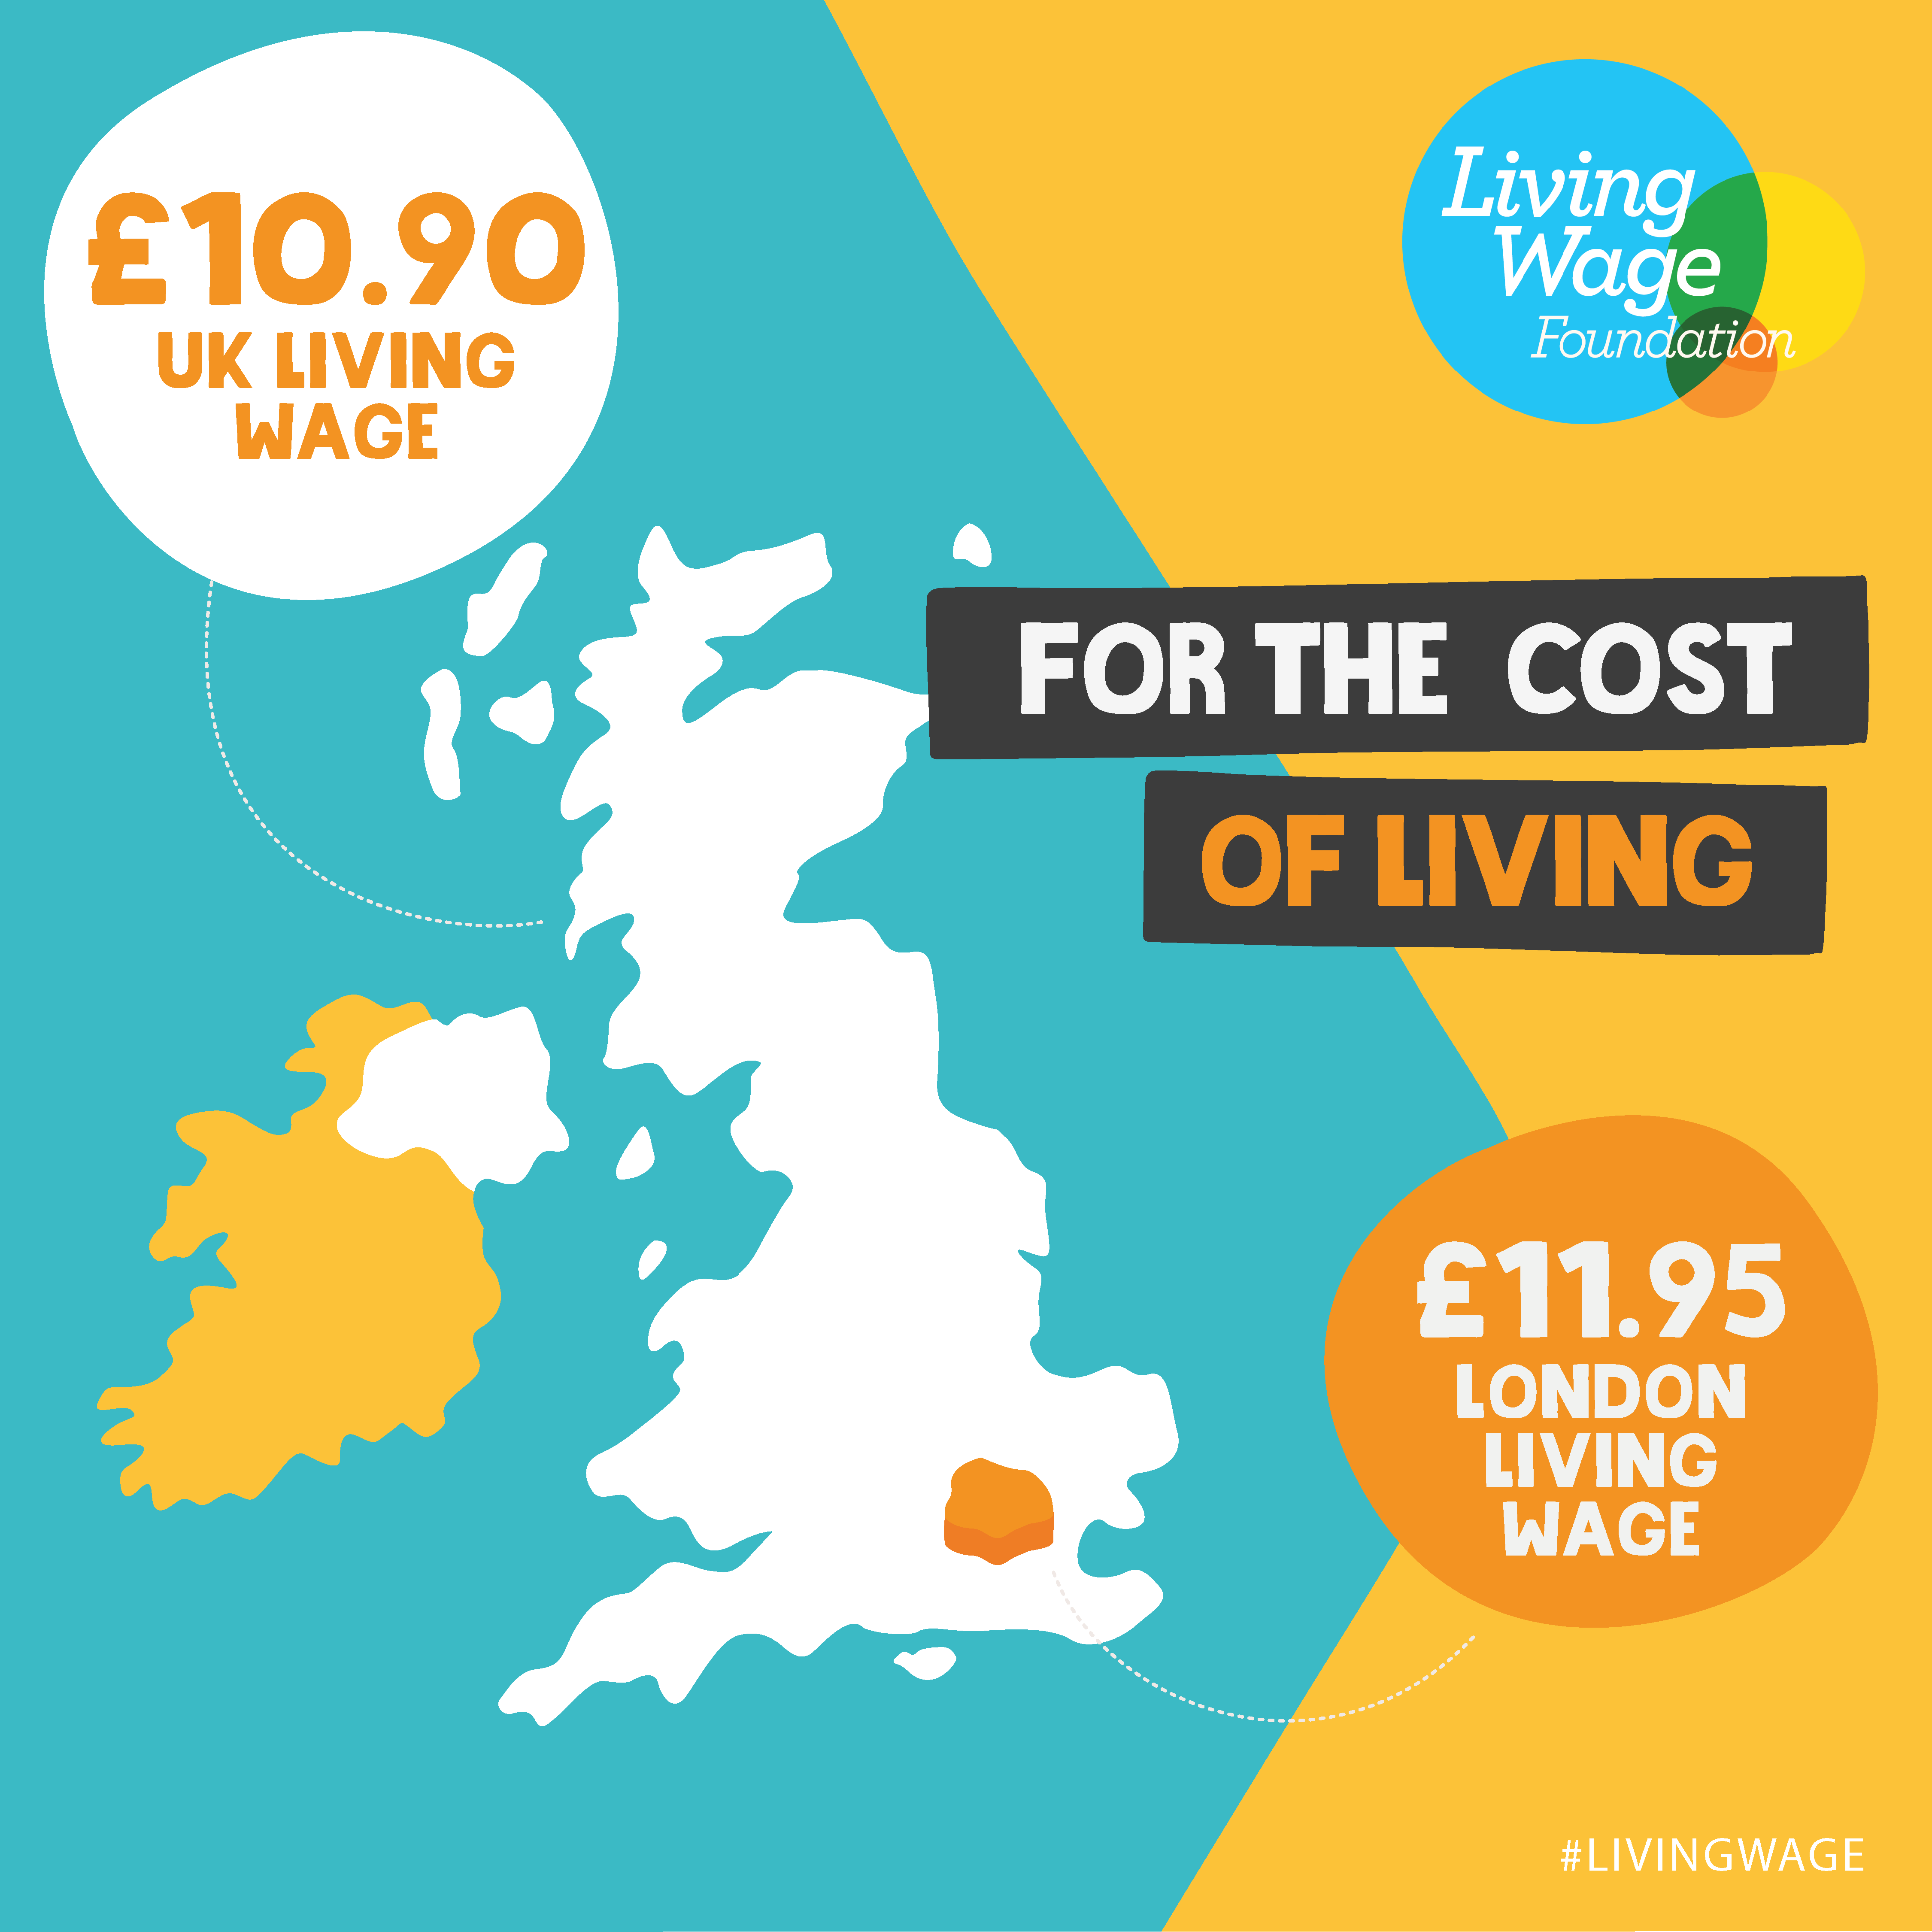 Real Living Wage Increases To 10 90 In UK And 11 95 In London As The